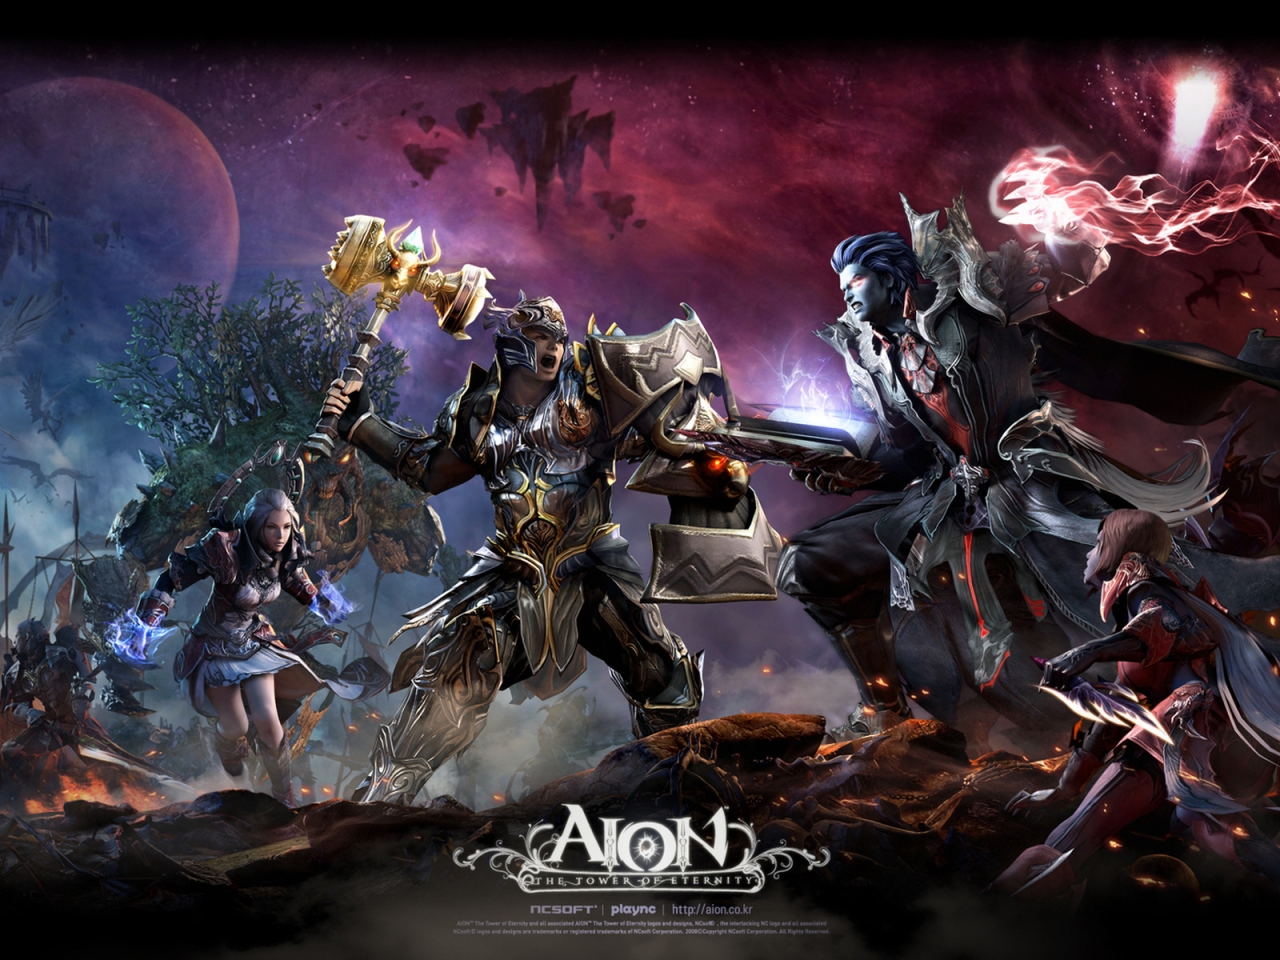 Aion The Tower of Eternity Characters for 1280 x 960 resolution